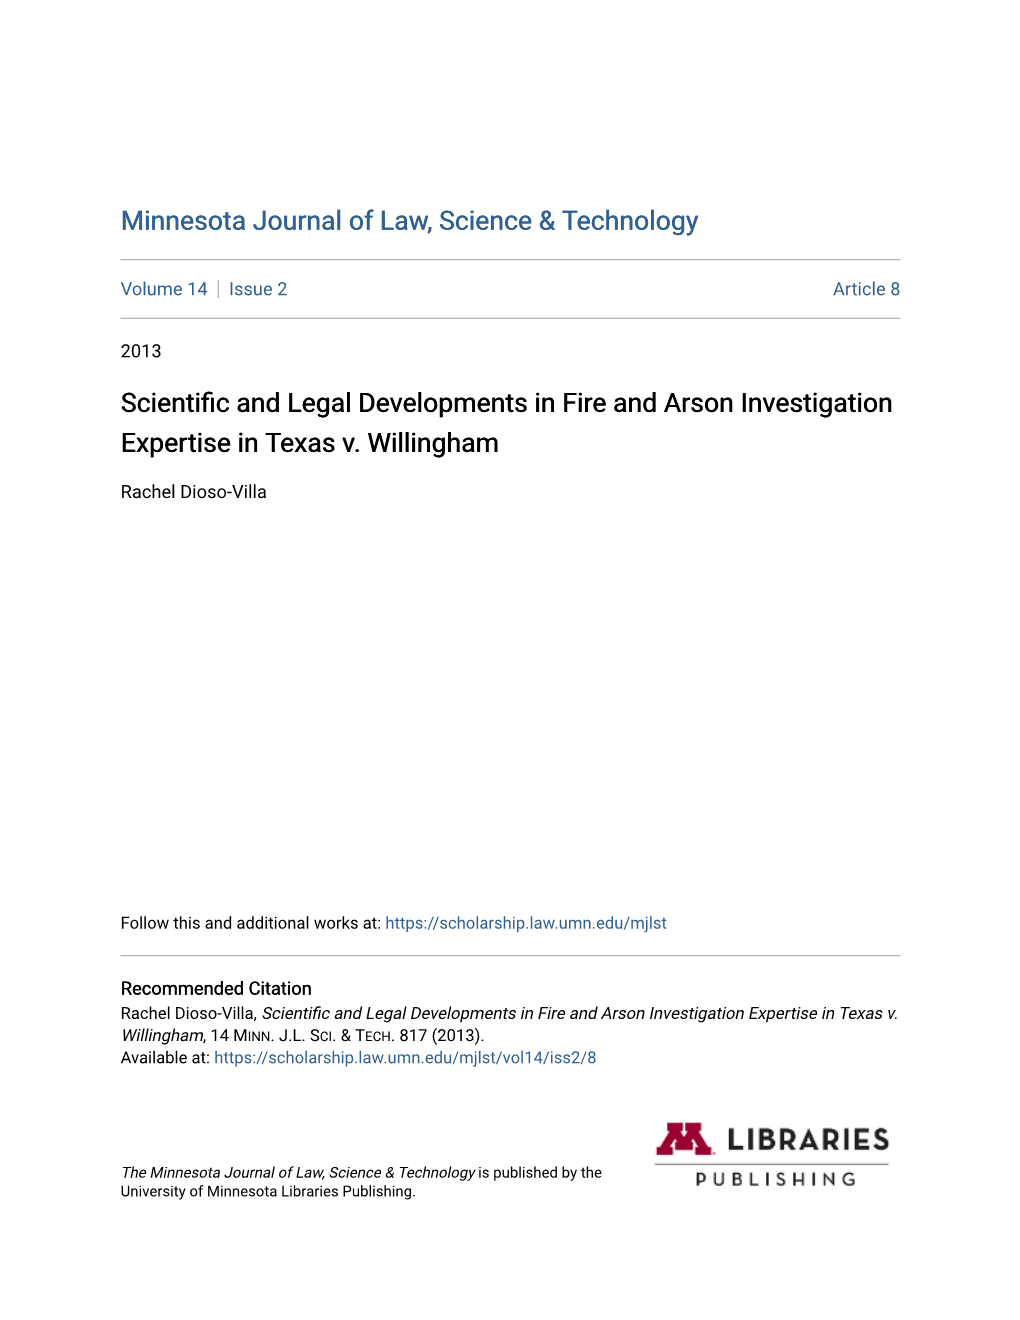 Scientific and Legal Developments in Fire and Arson Investigation Expertise in Texas V